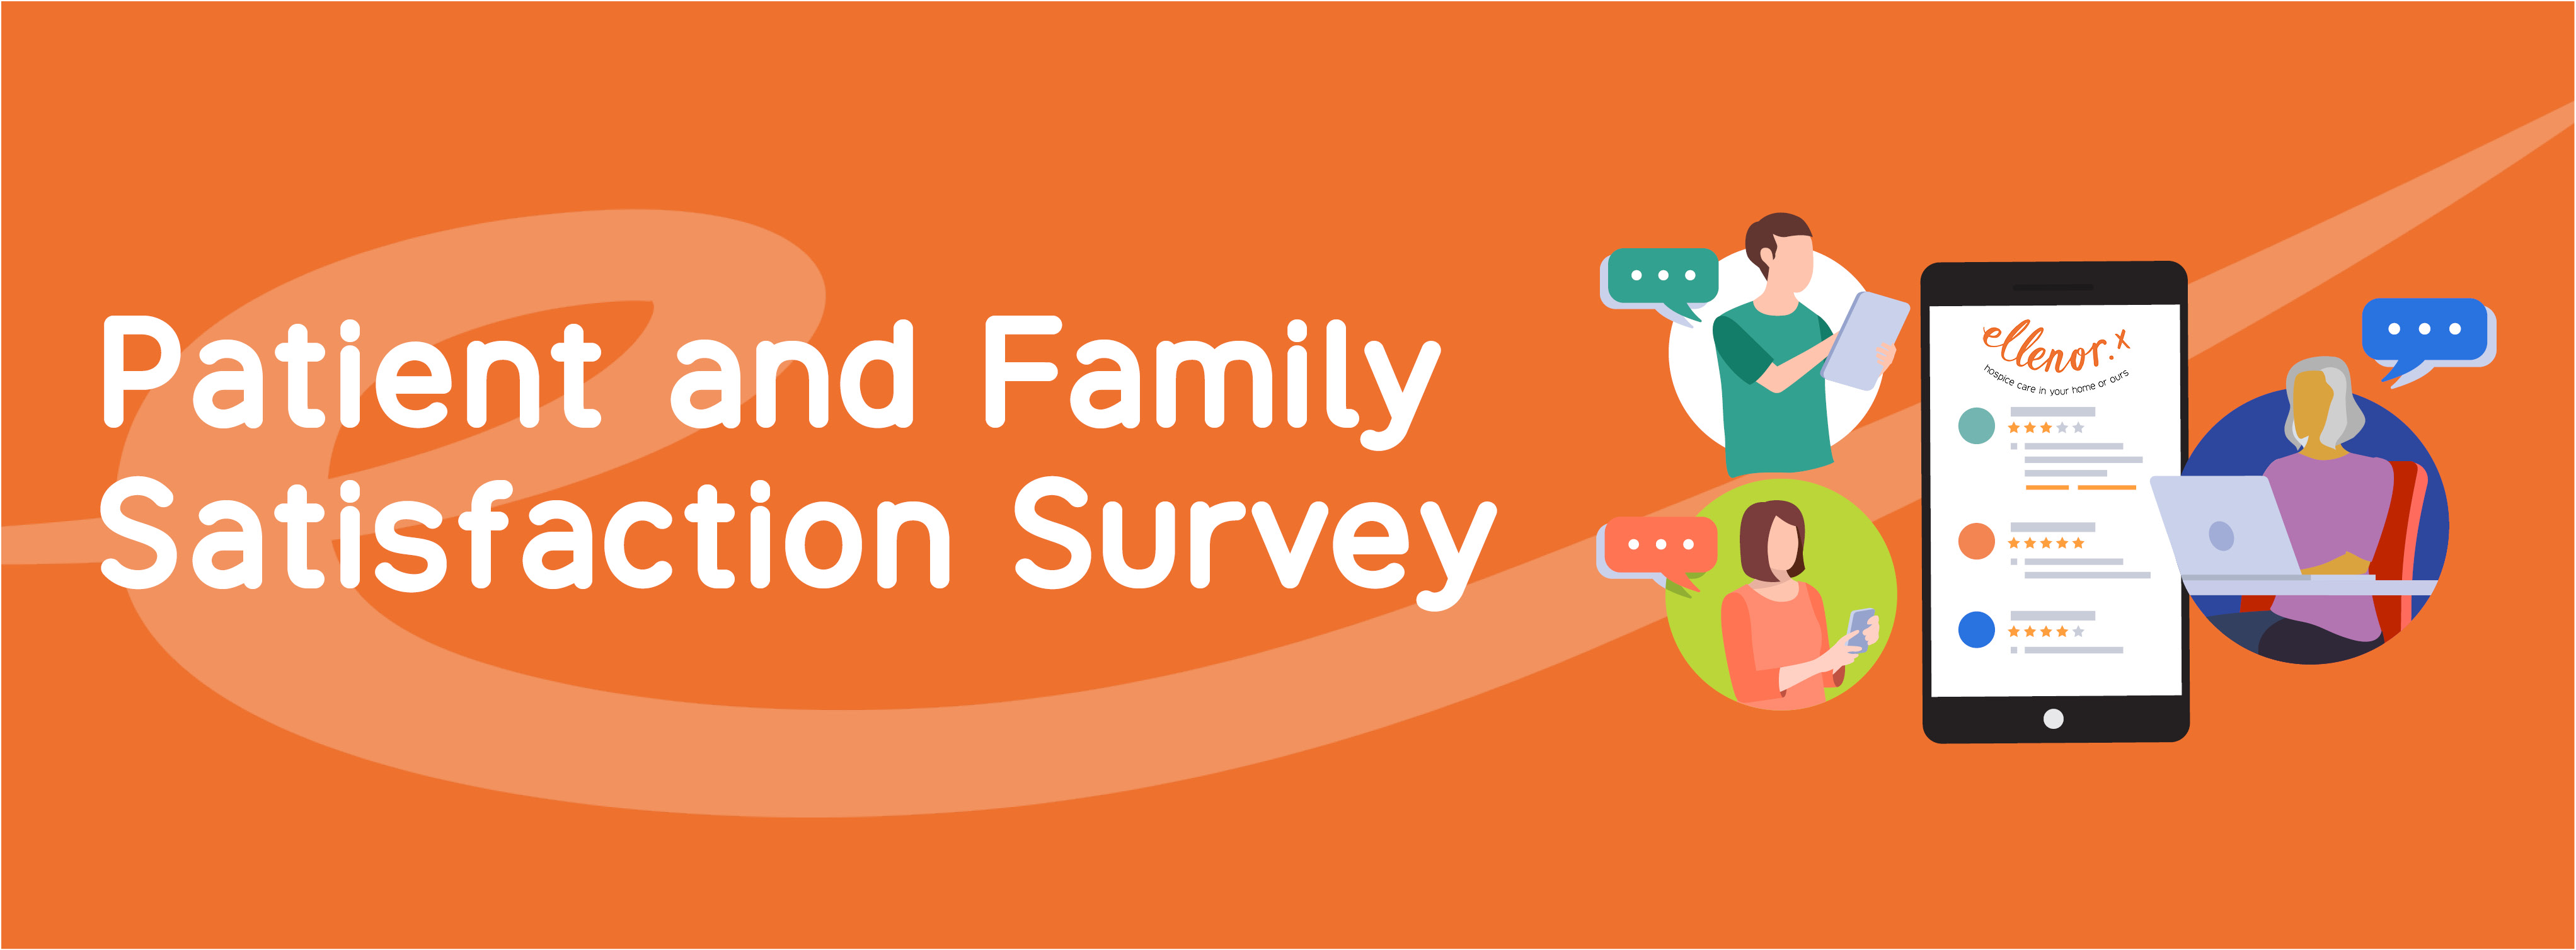 Patient And Family Satisfaction Survey Carousel Image